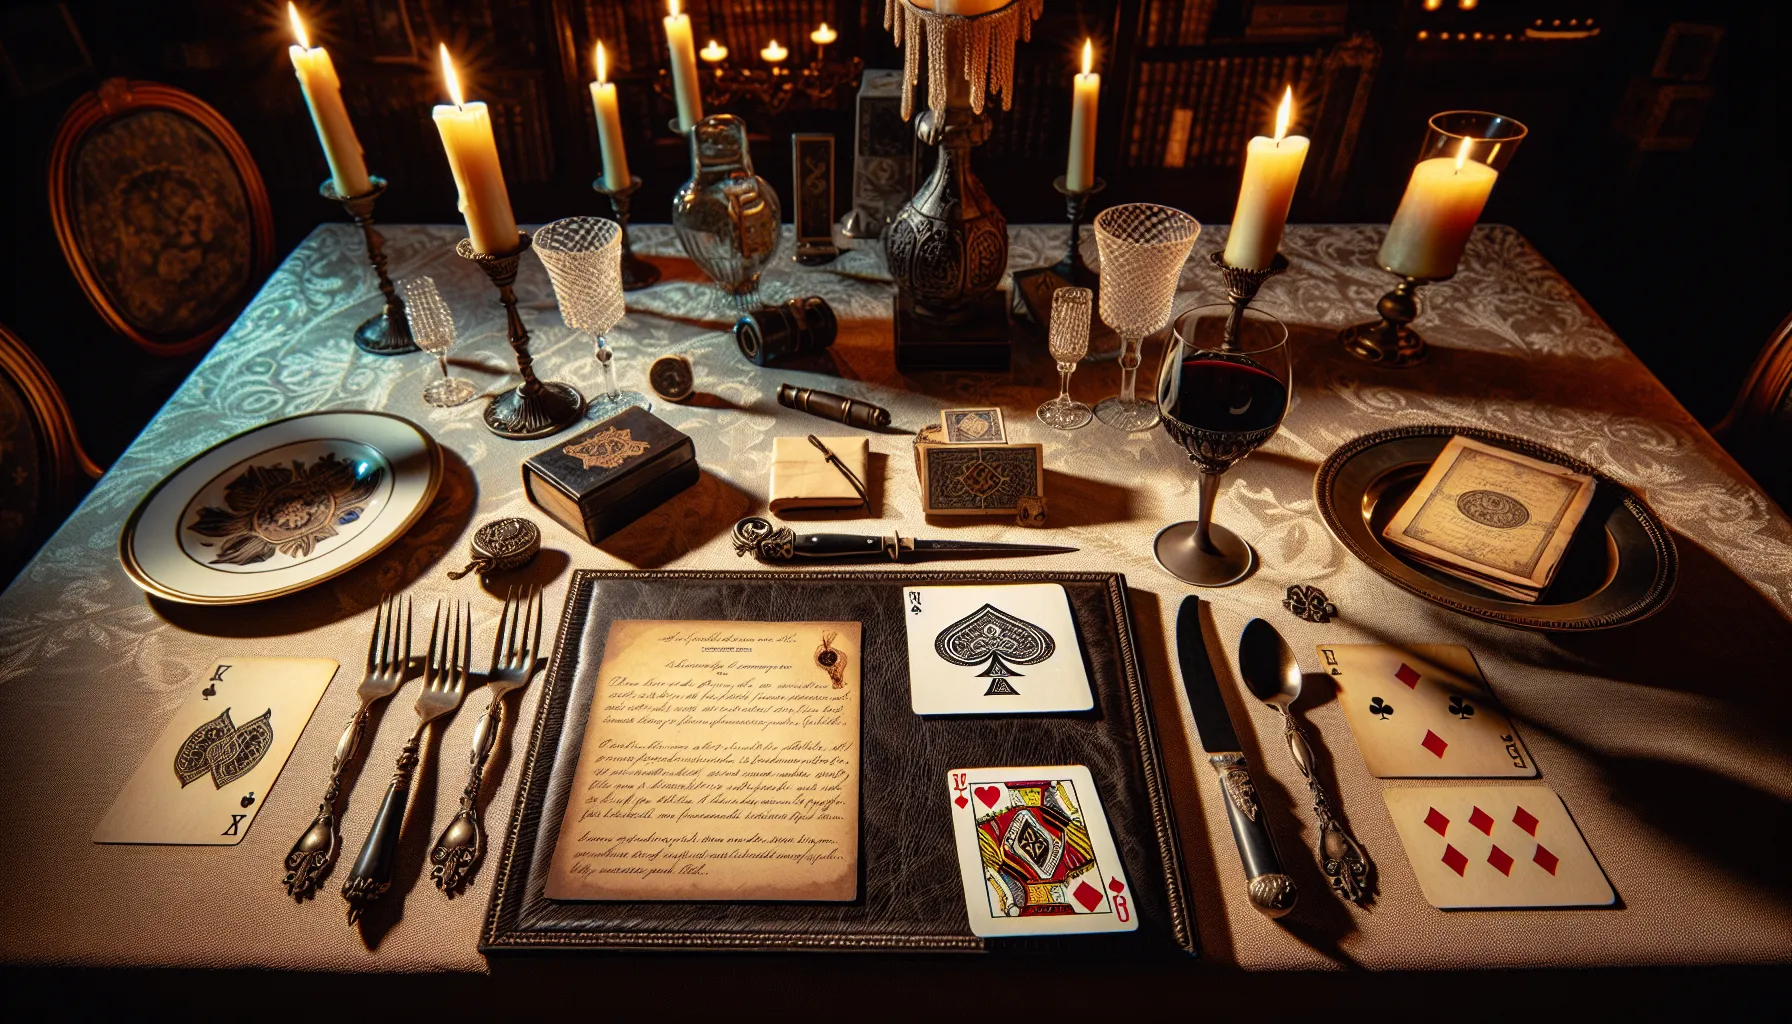 A tableau of mystery unfolds at the dinner table, where each prop becomes a clue, and each guest a character in this interactive tale of intrigue.